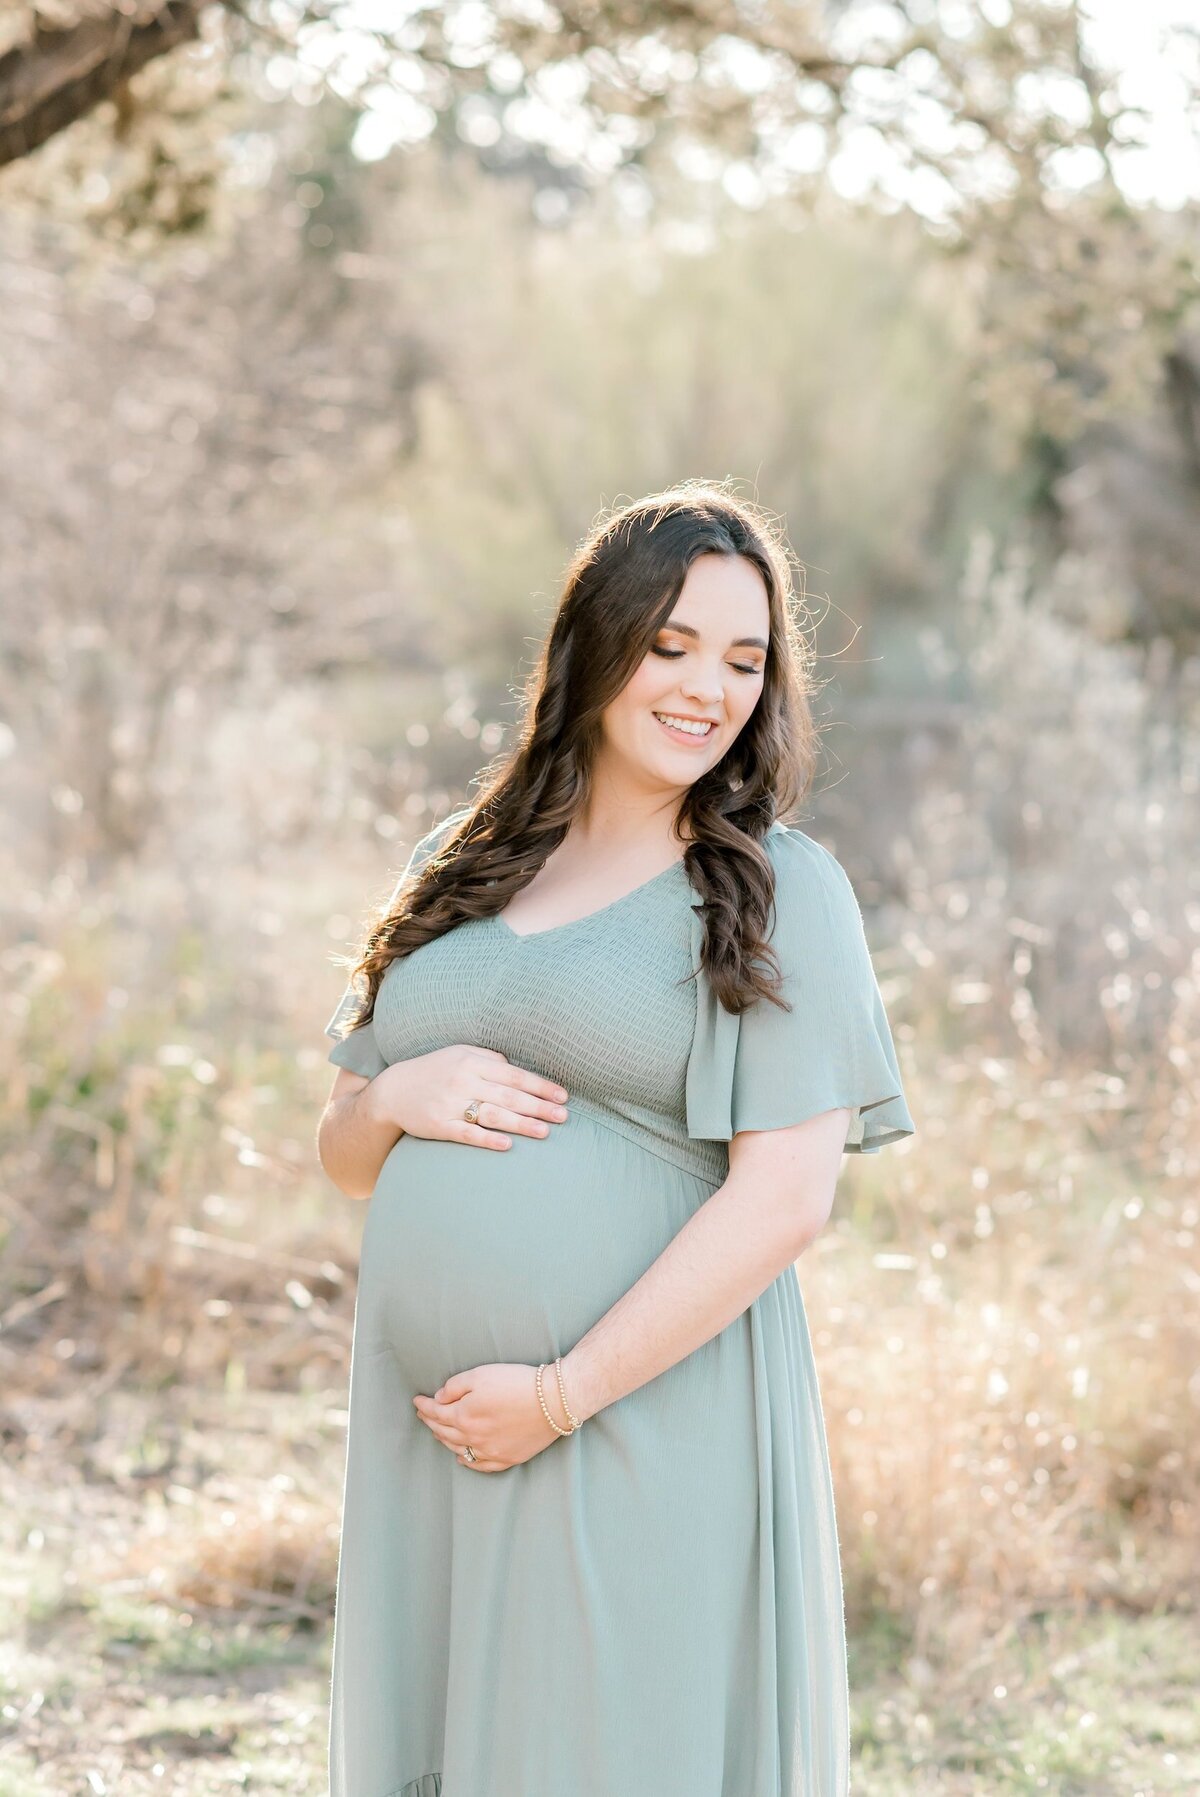 San-Antonio-Maternity-Photography-2.4.23 Franki_s Maternity Session- Laurie Adalle Photography-2